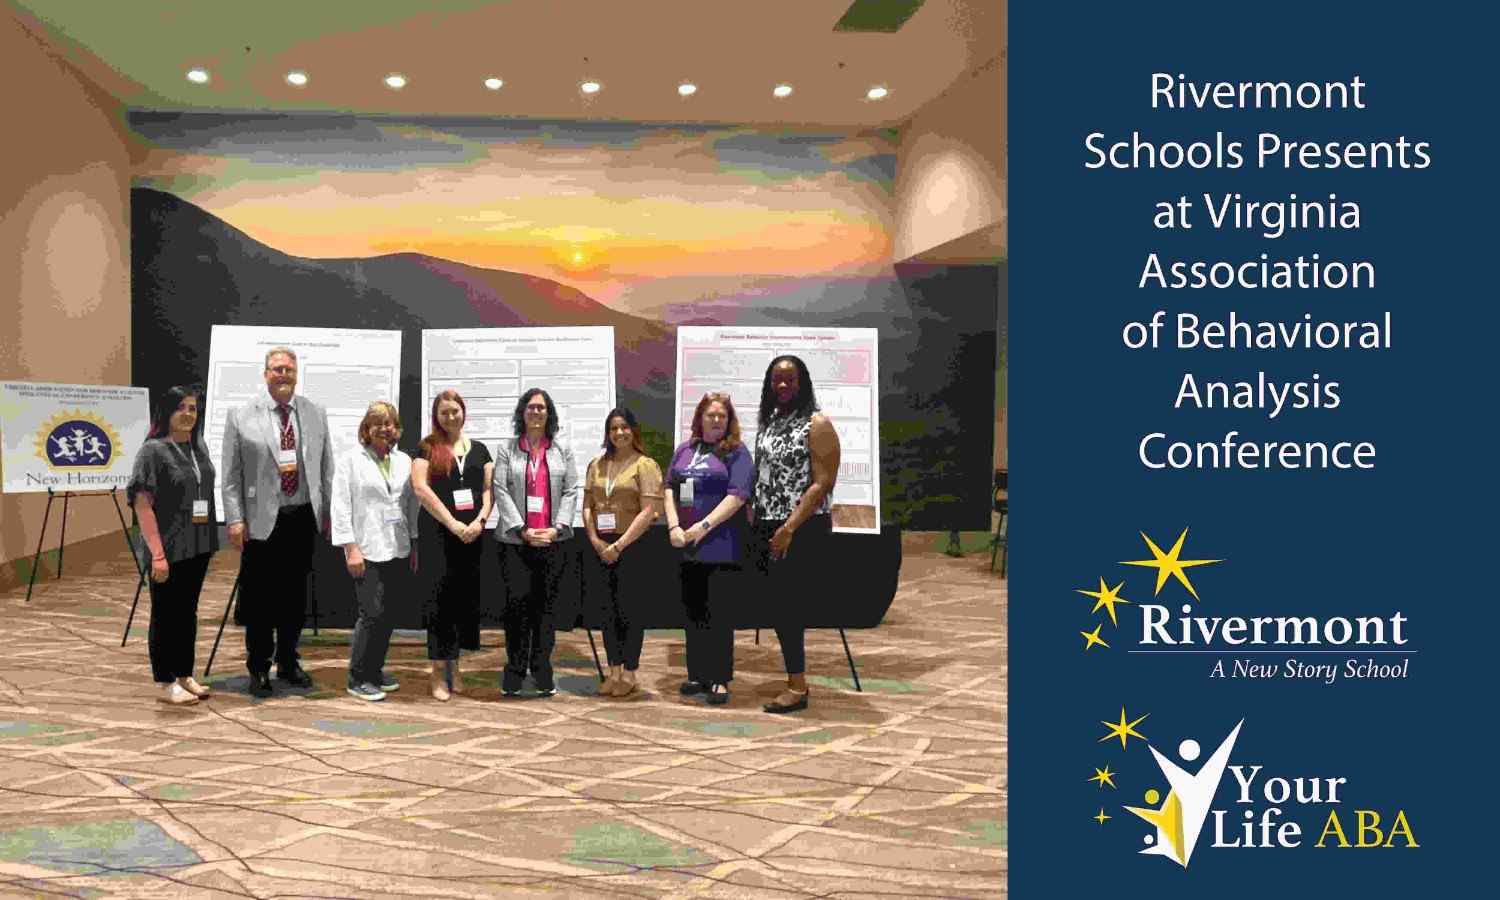 Rivermont Schools Presents at Virginia Association of Behavioral Analysis Conference